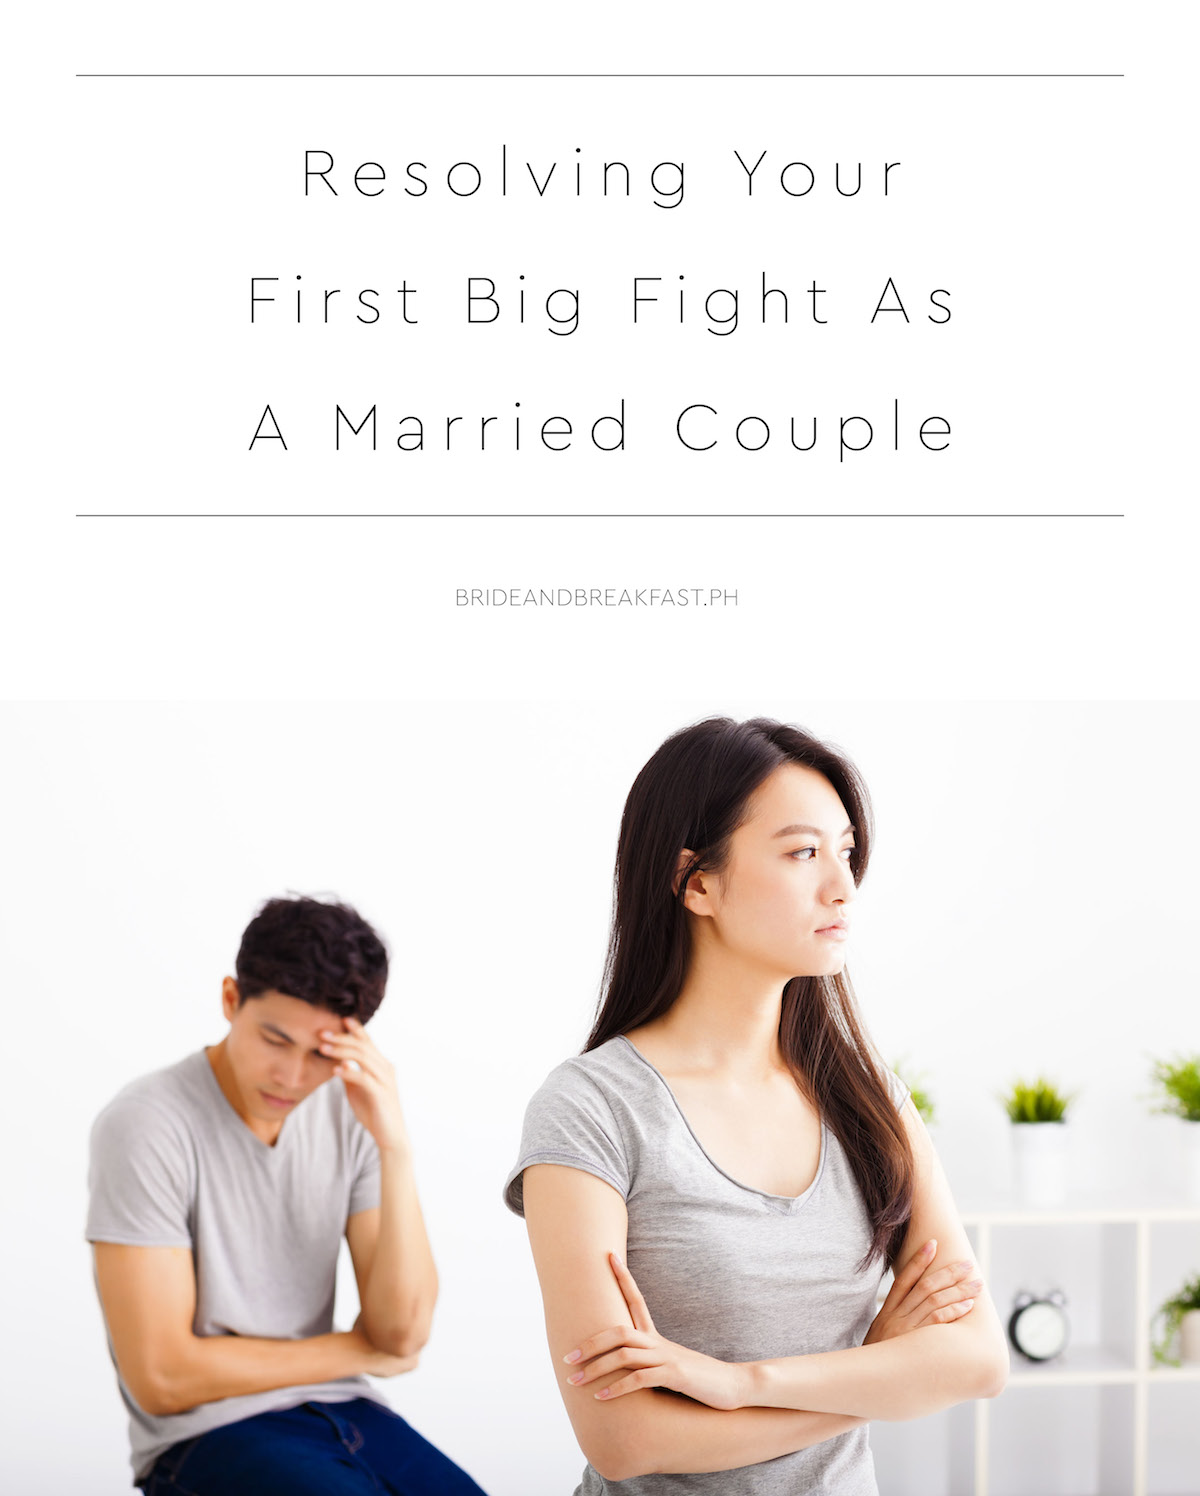 Resolving Your First Big Fight As A Married Couple